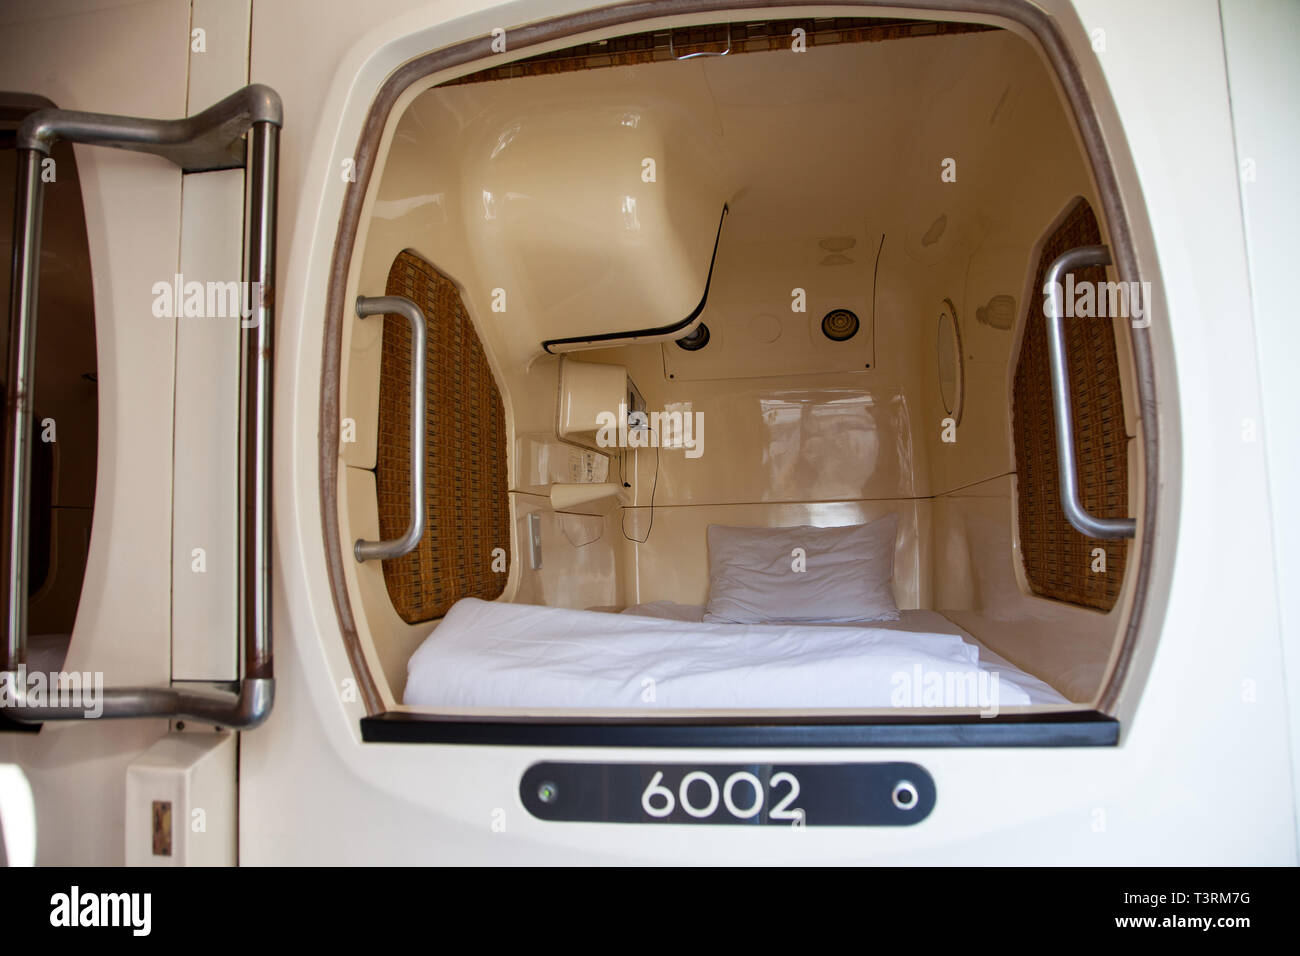 Japan: Tokyo. Interior of a capsule hotel's cabin, typical from Japan, a type of hotel that features a large number of extremely small rooms intended  Stock Photo